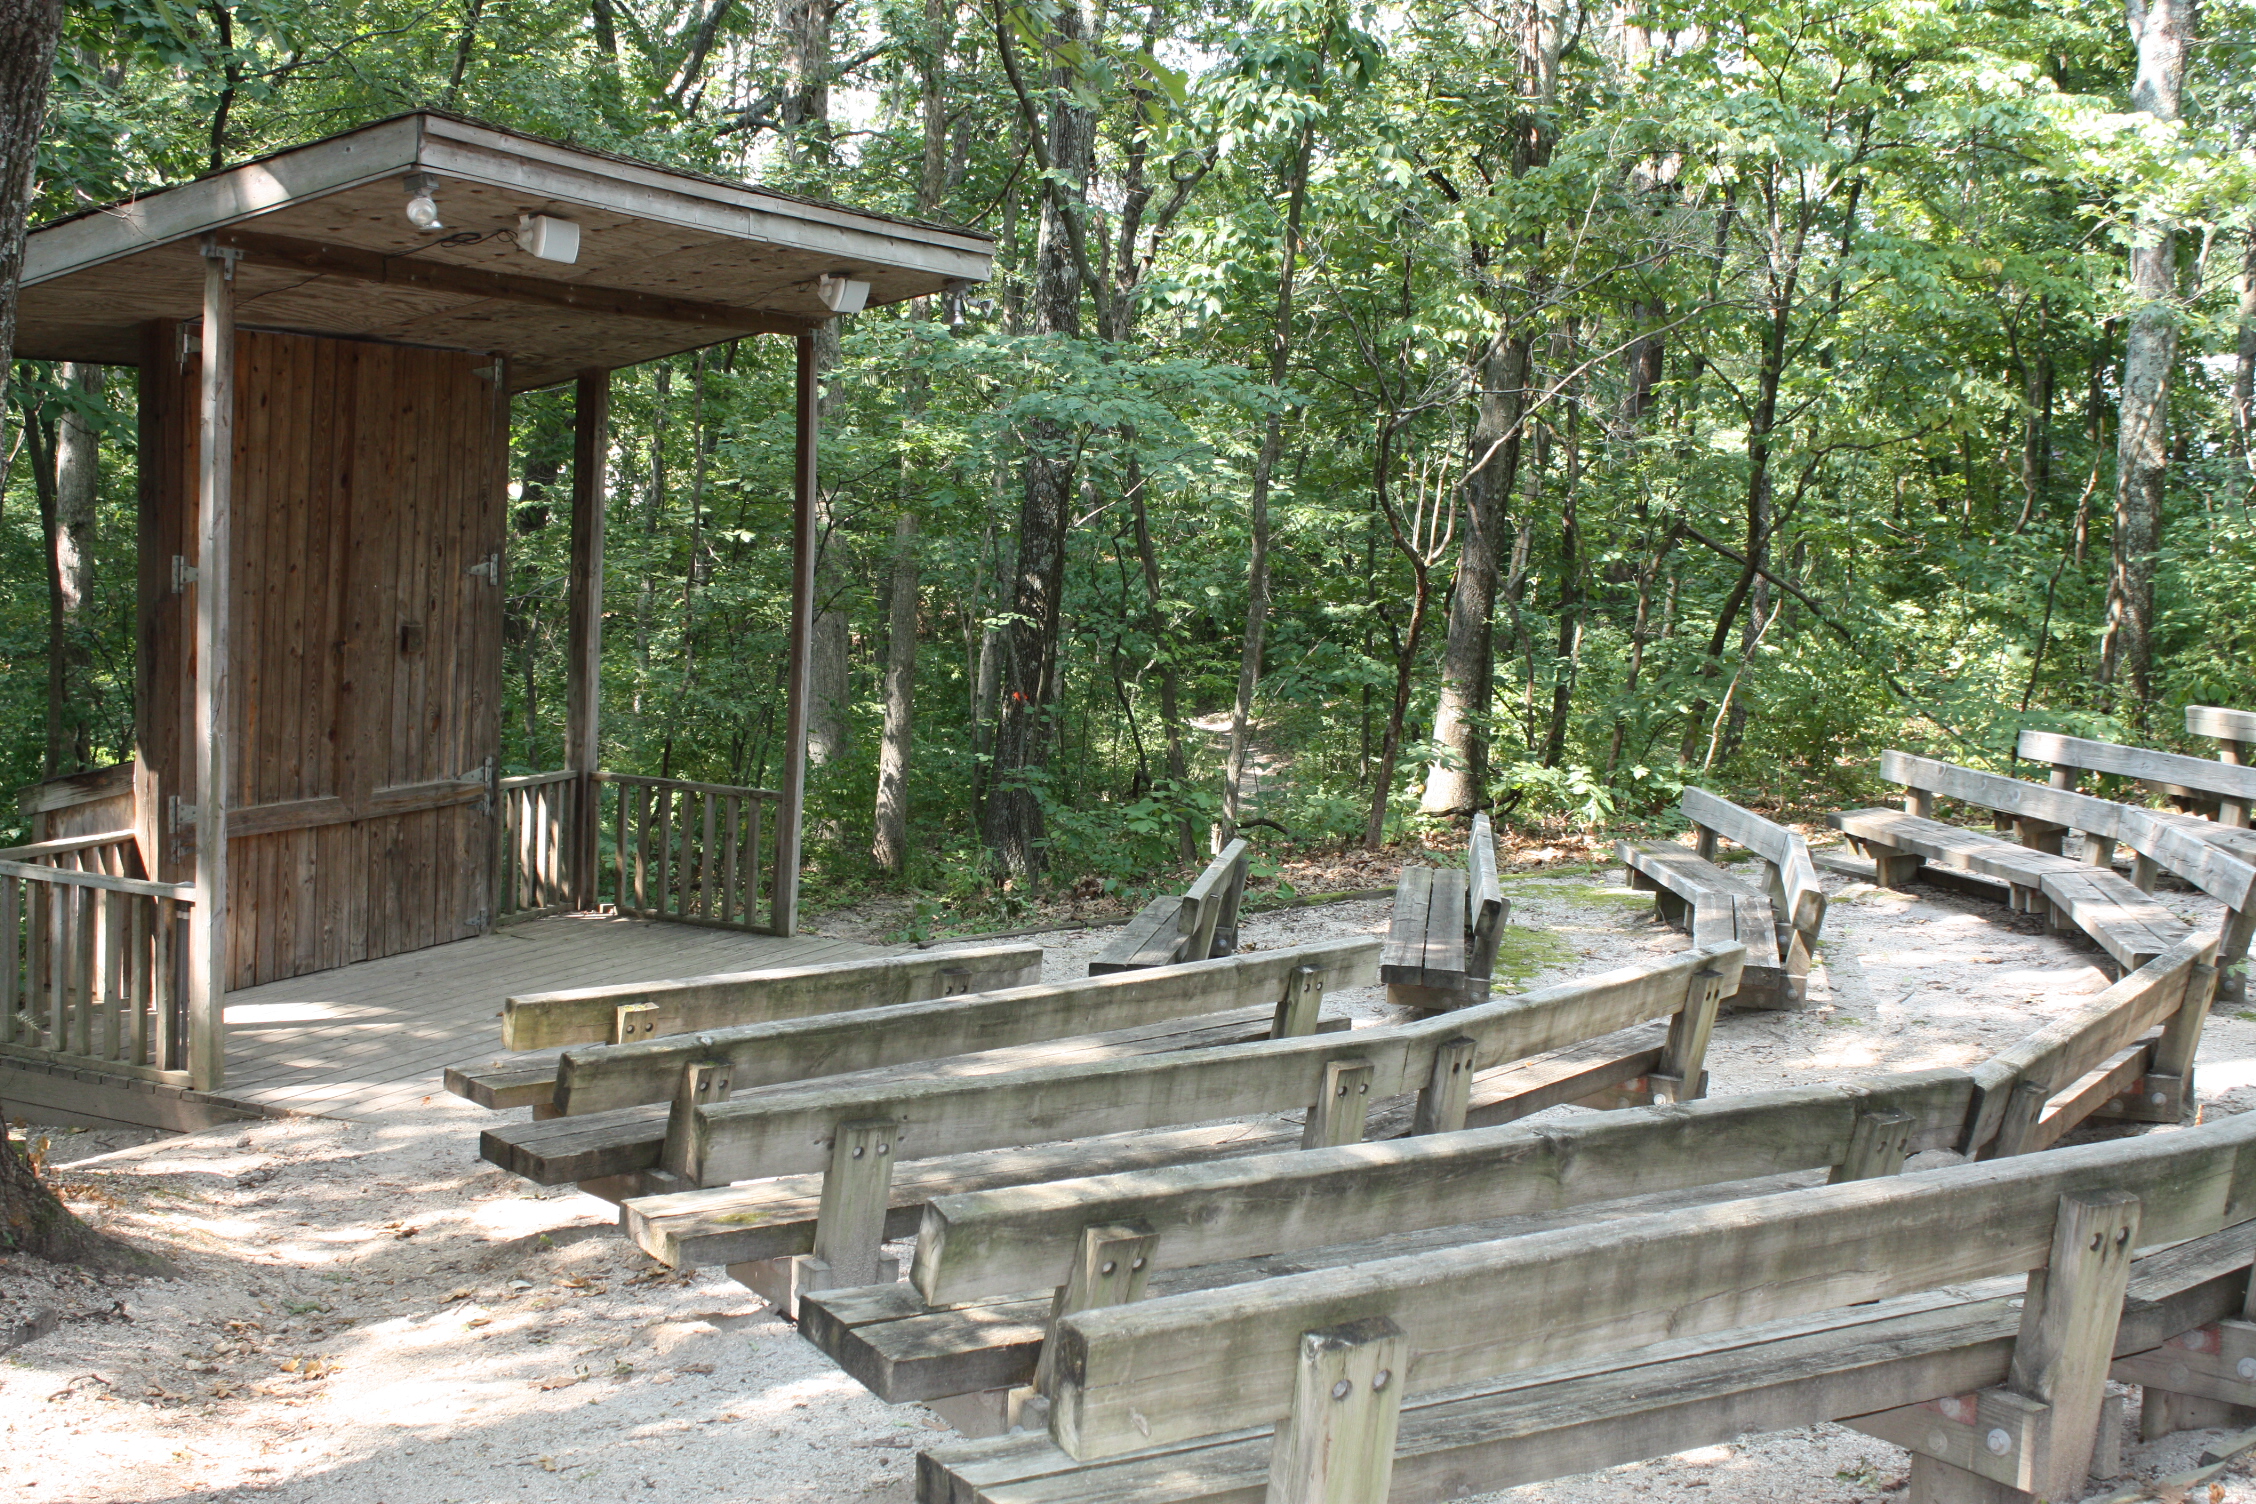 amphitheater benches and stage area